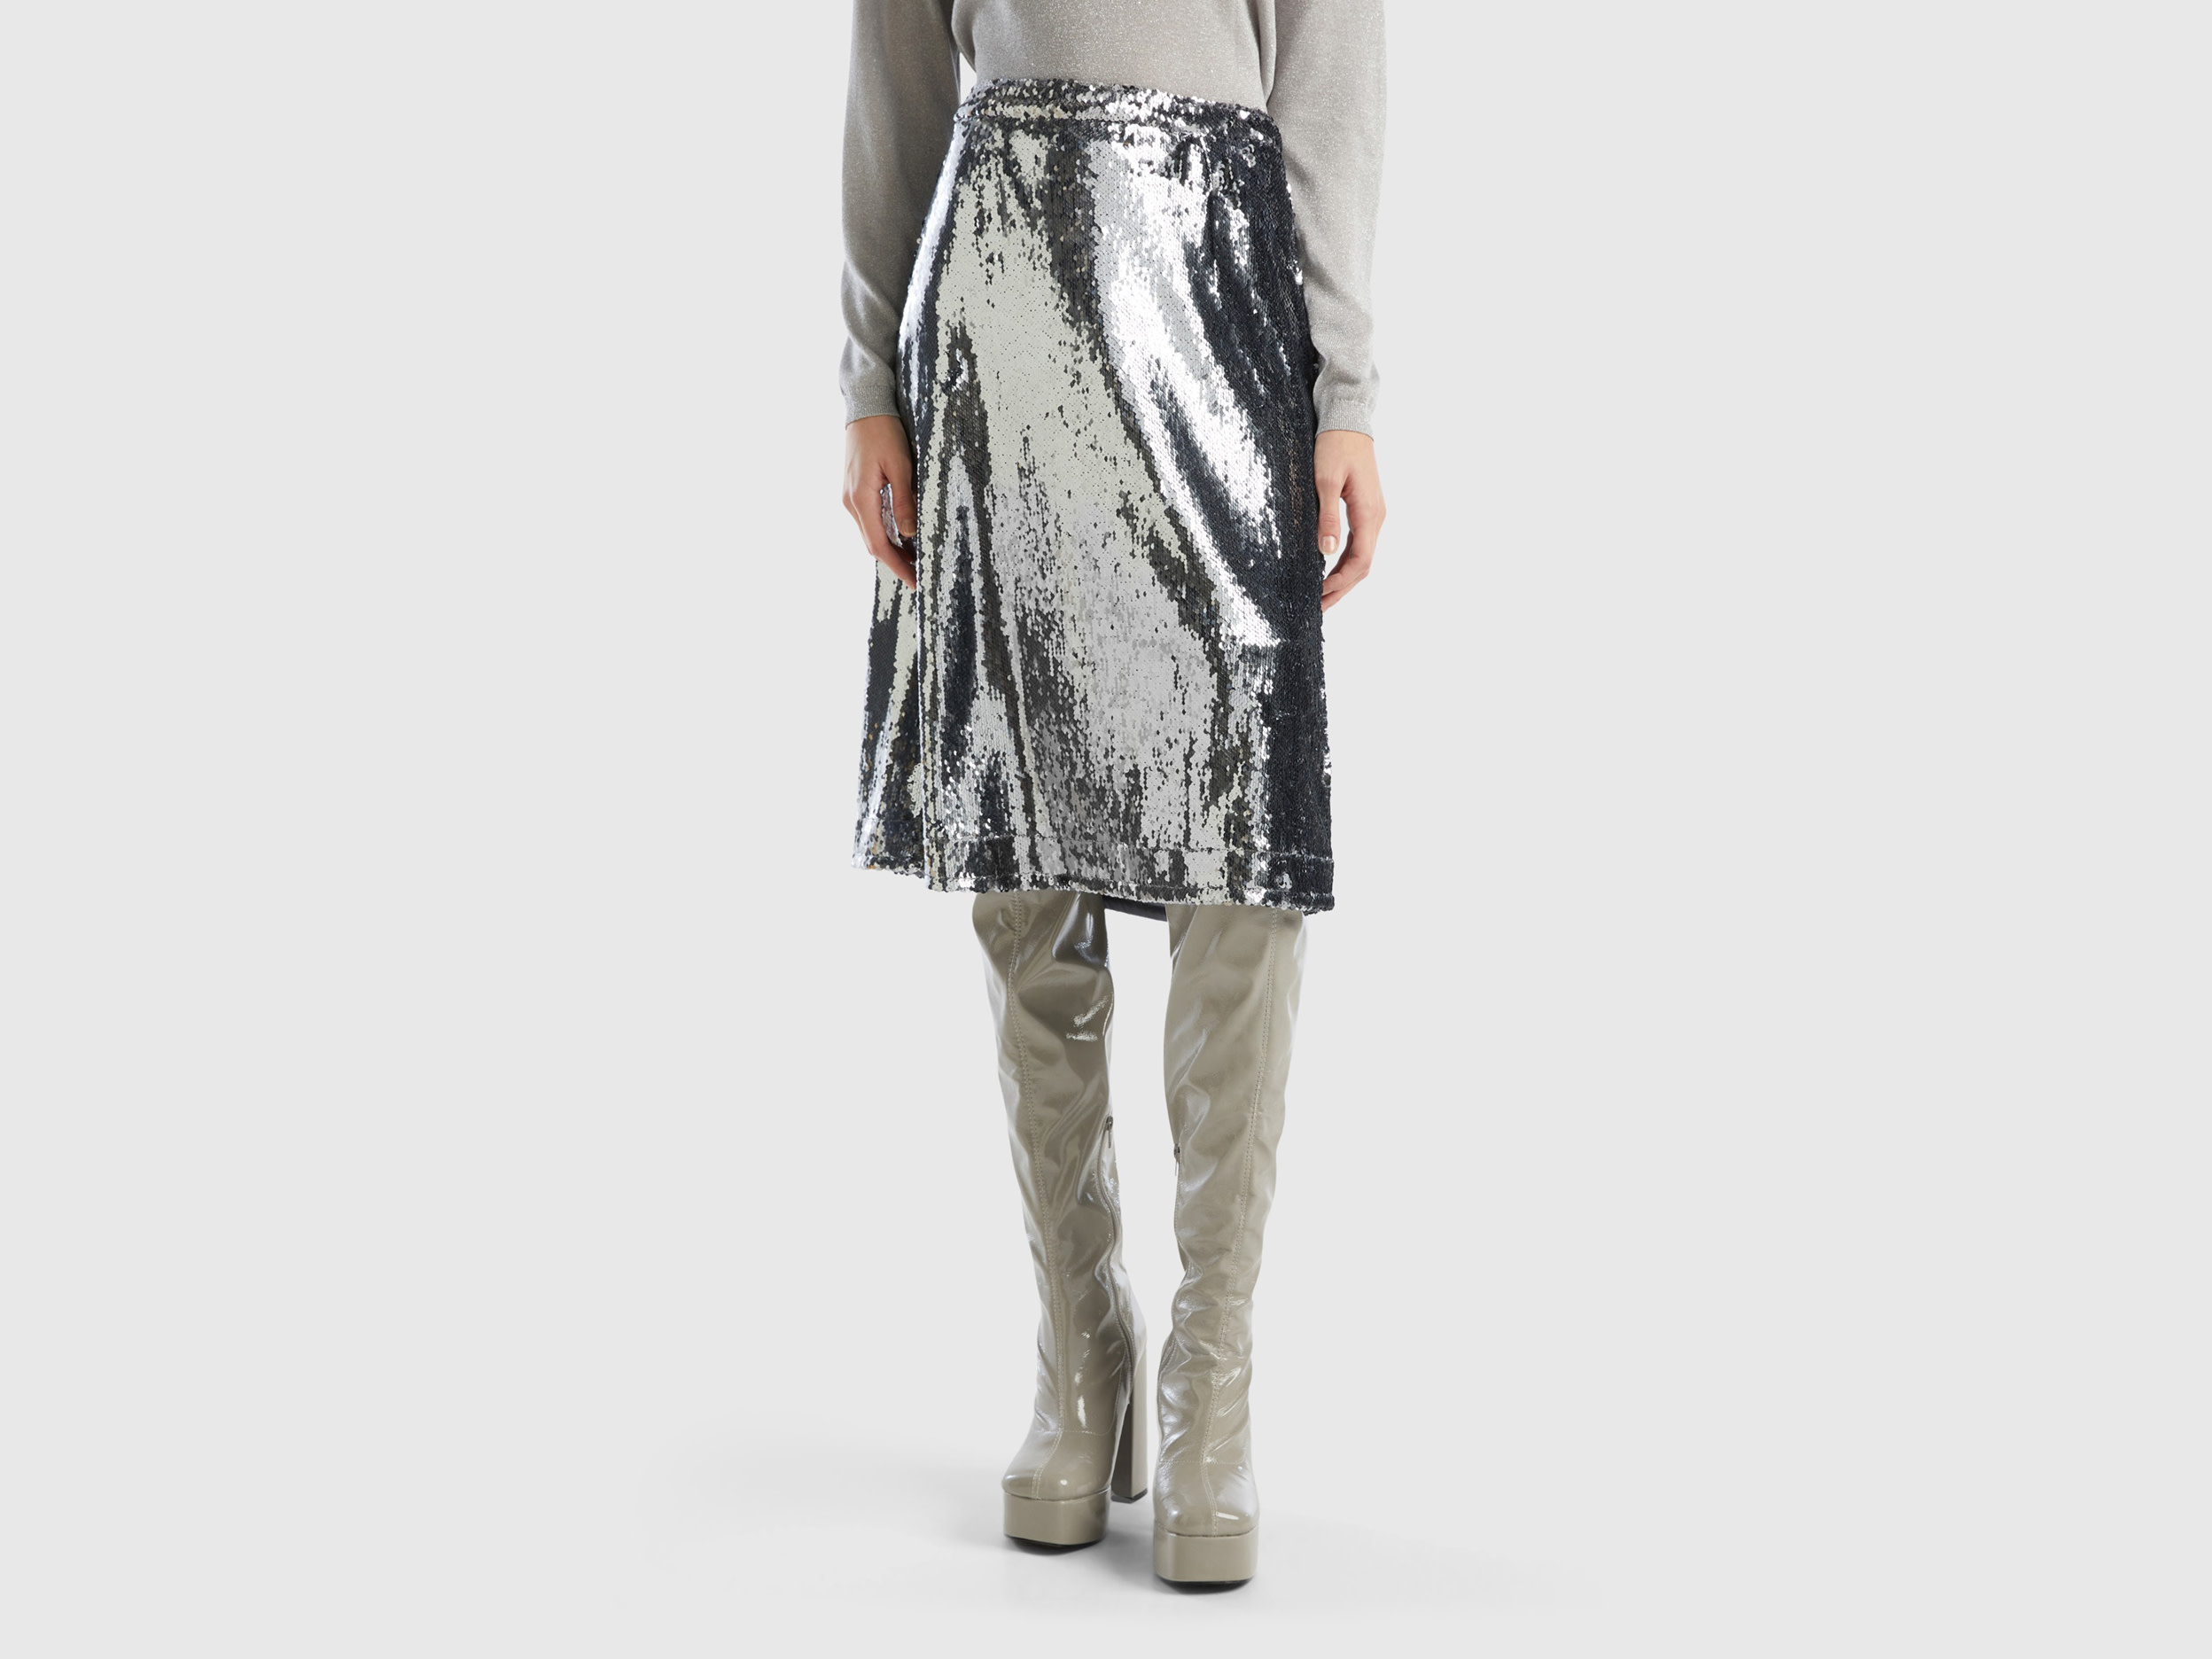 Benetton, Midi Skirt With Sequins, size 6, Silver, Women